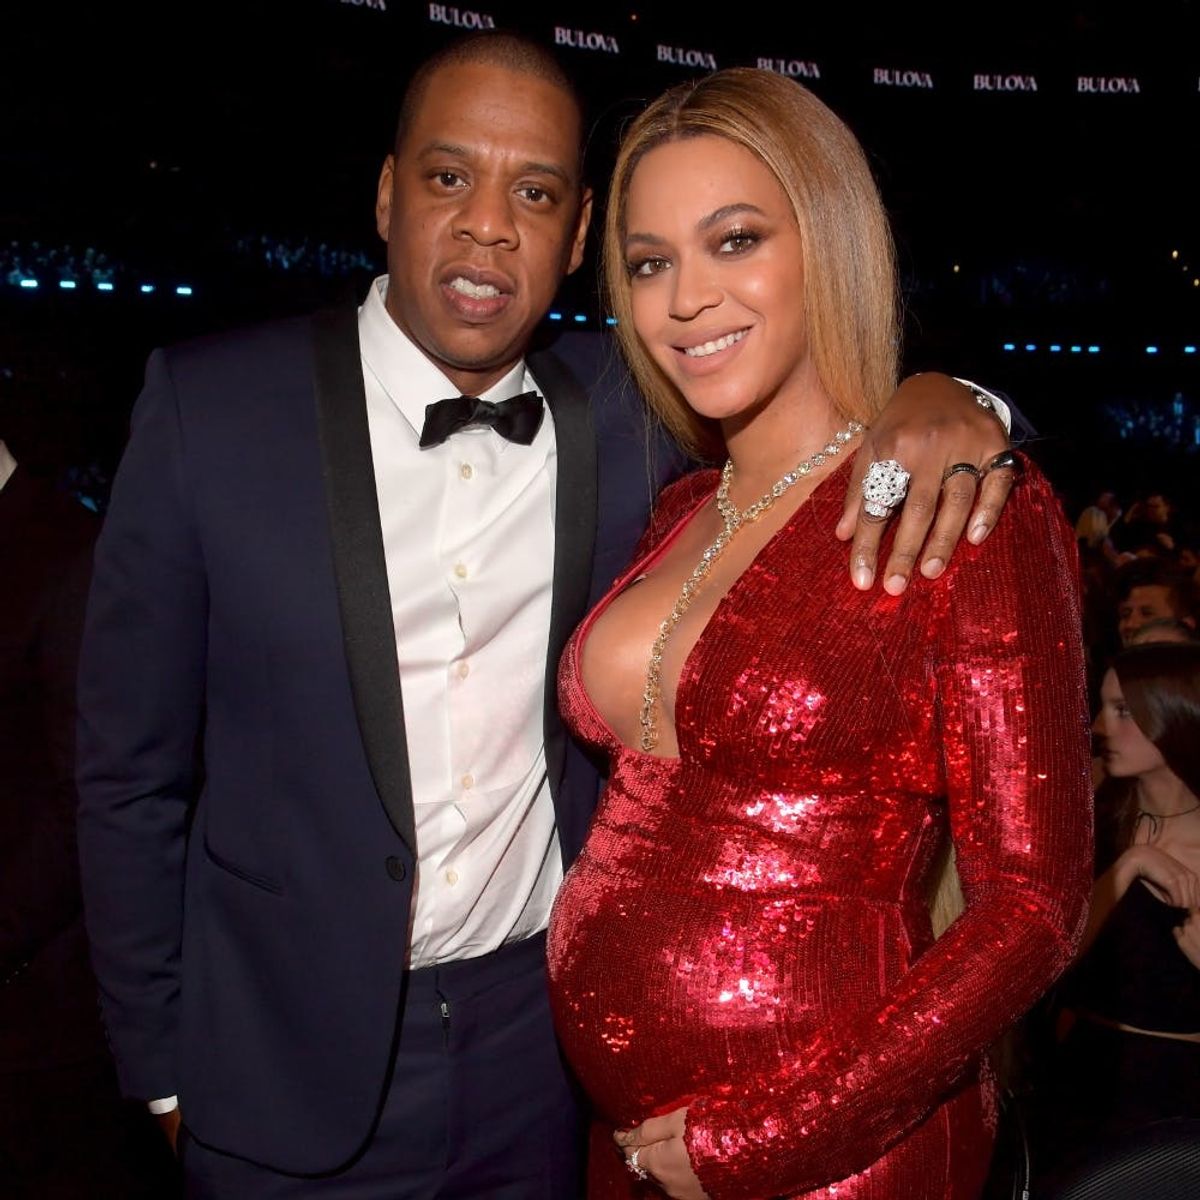 Beyoncé Might Be Dropping Baby Name Hints in These New Pics